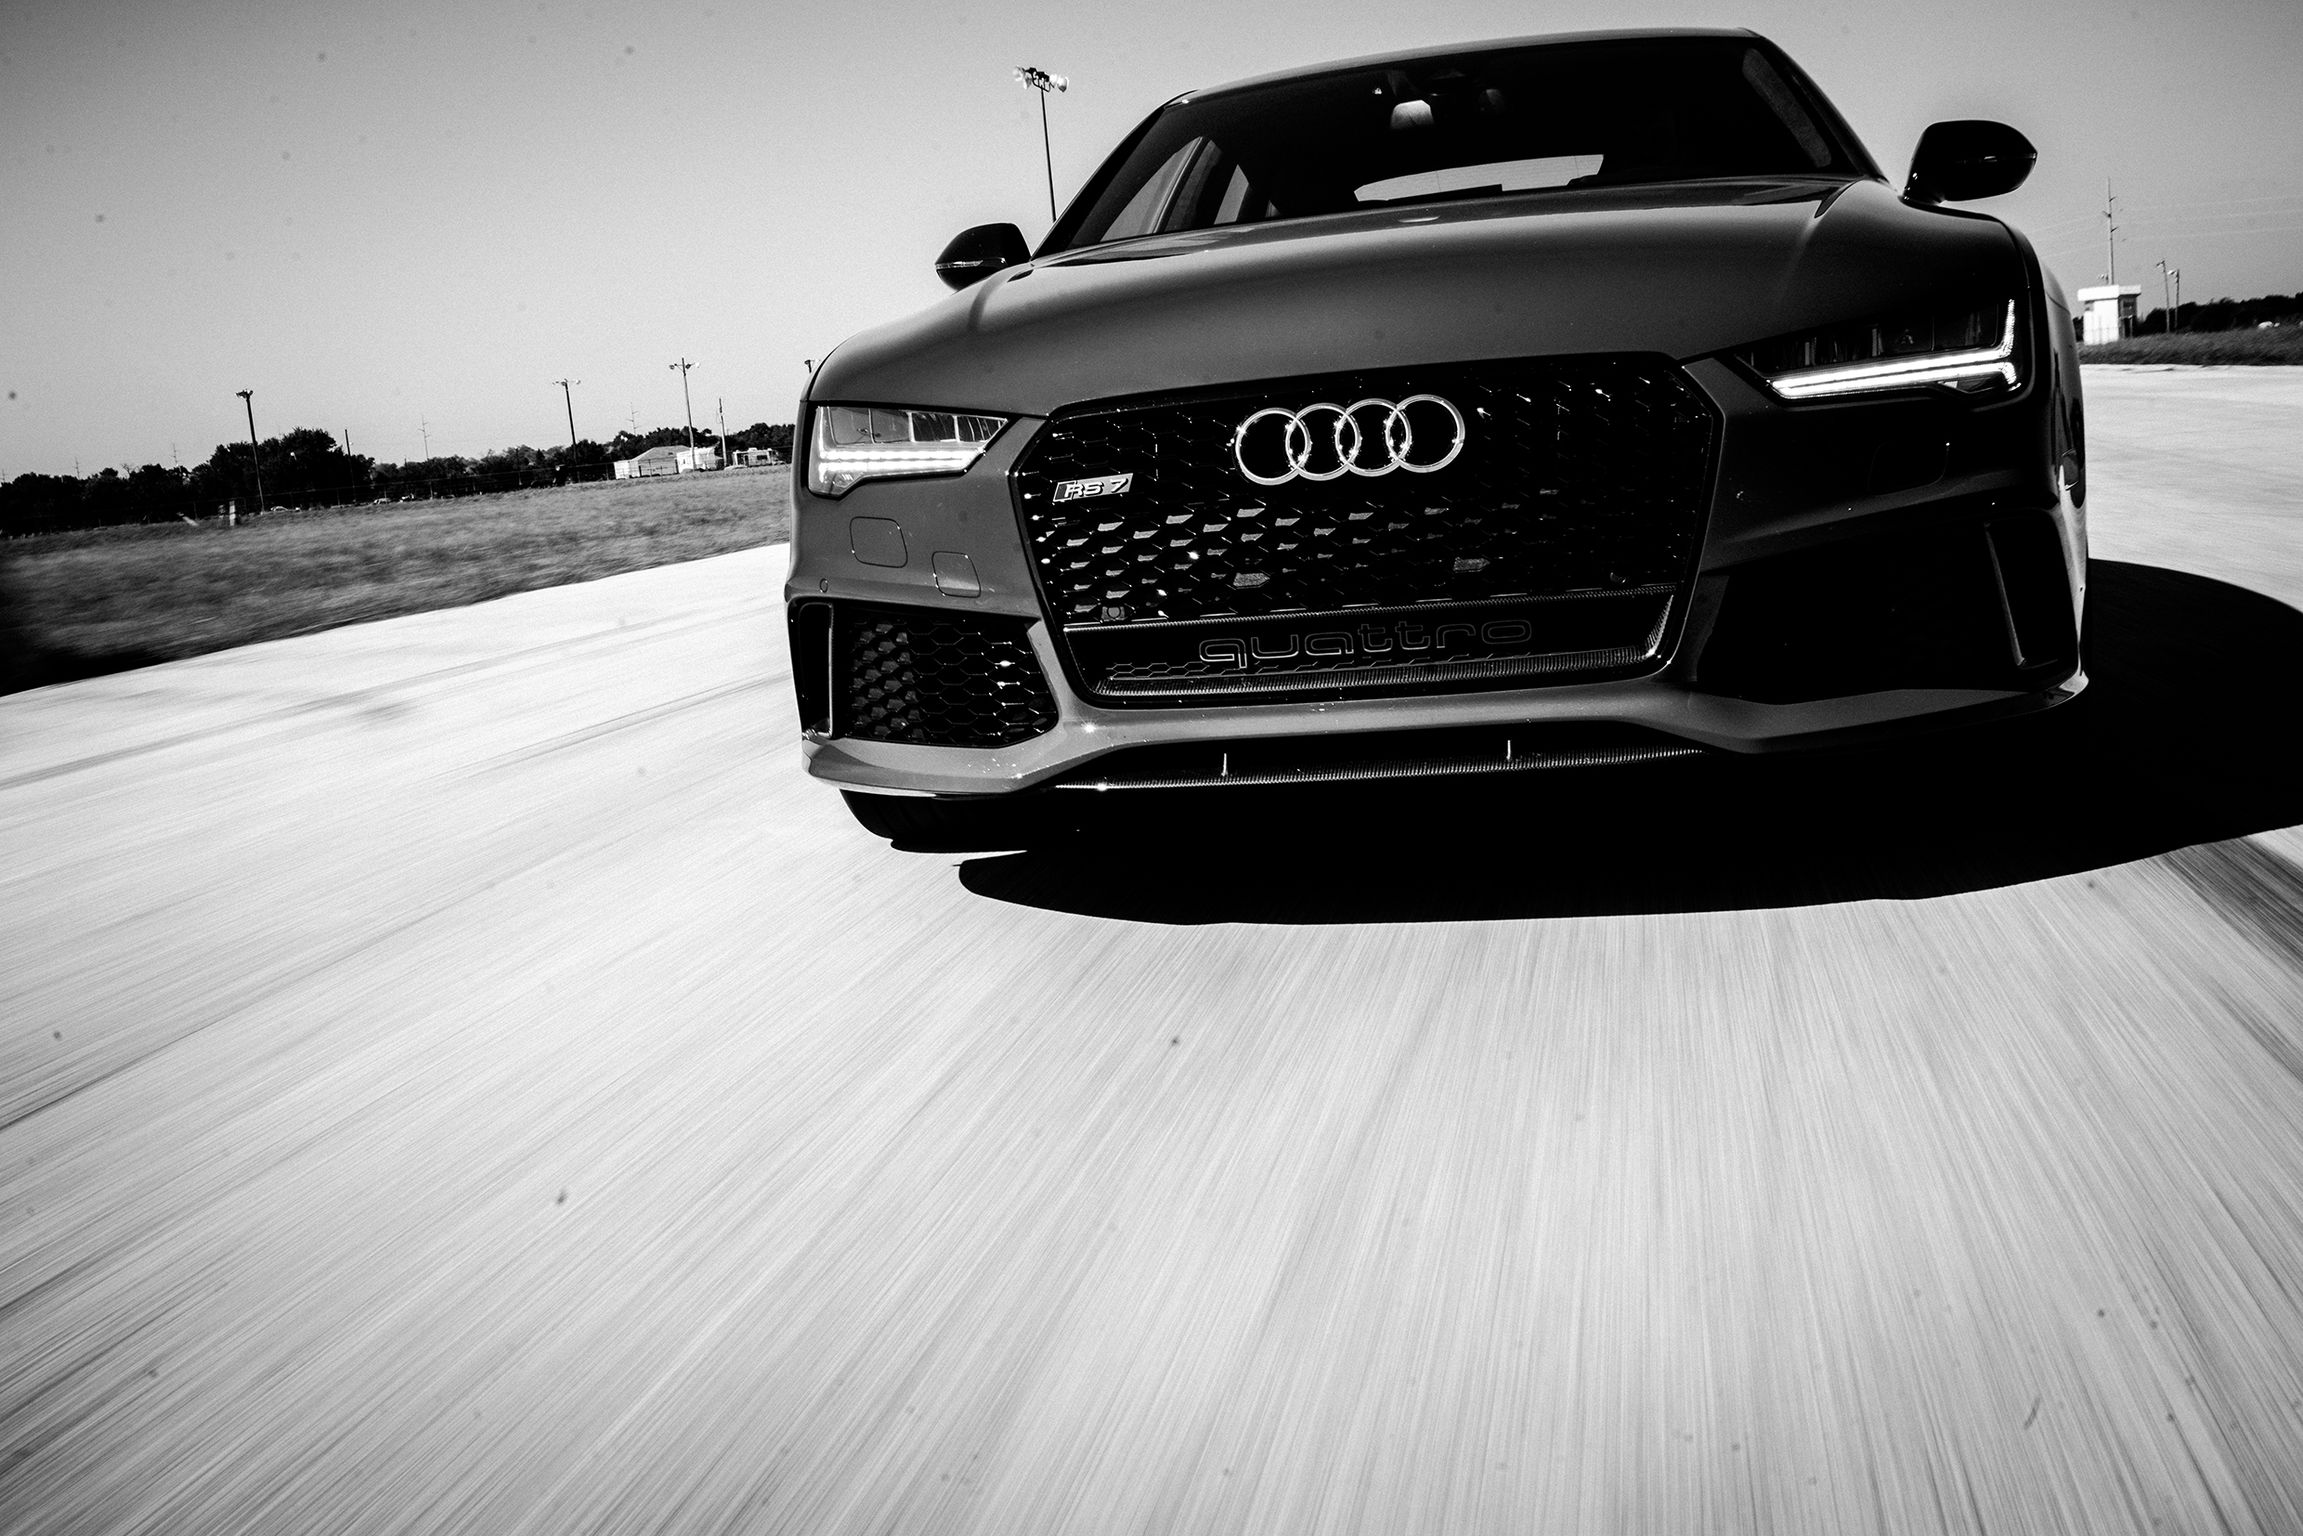 Friday Only: Audi collection Germany Design Gecko Sweepstakes